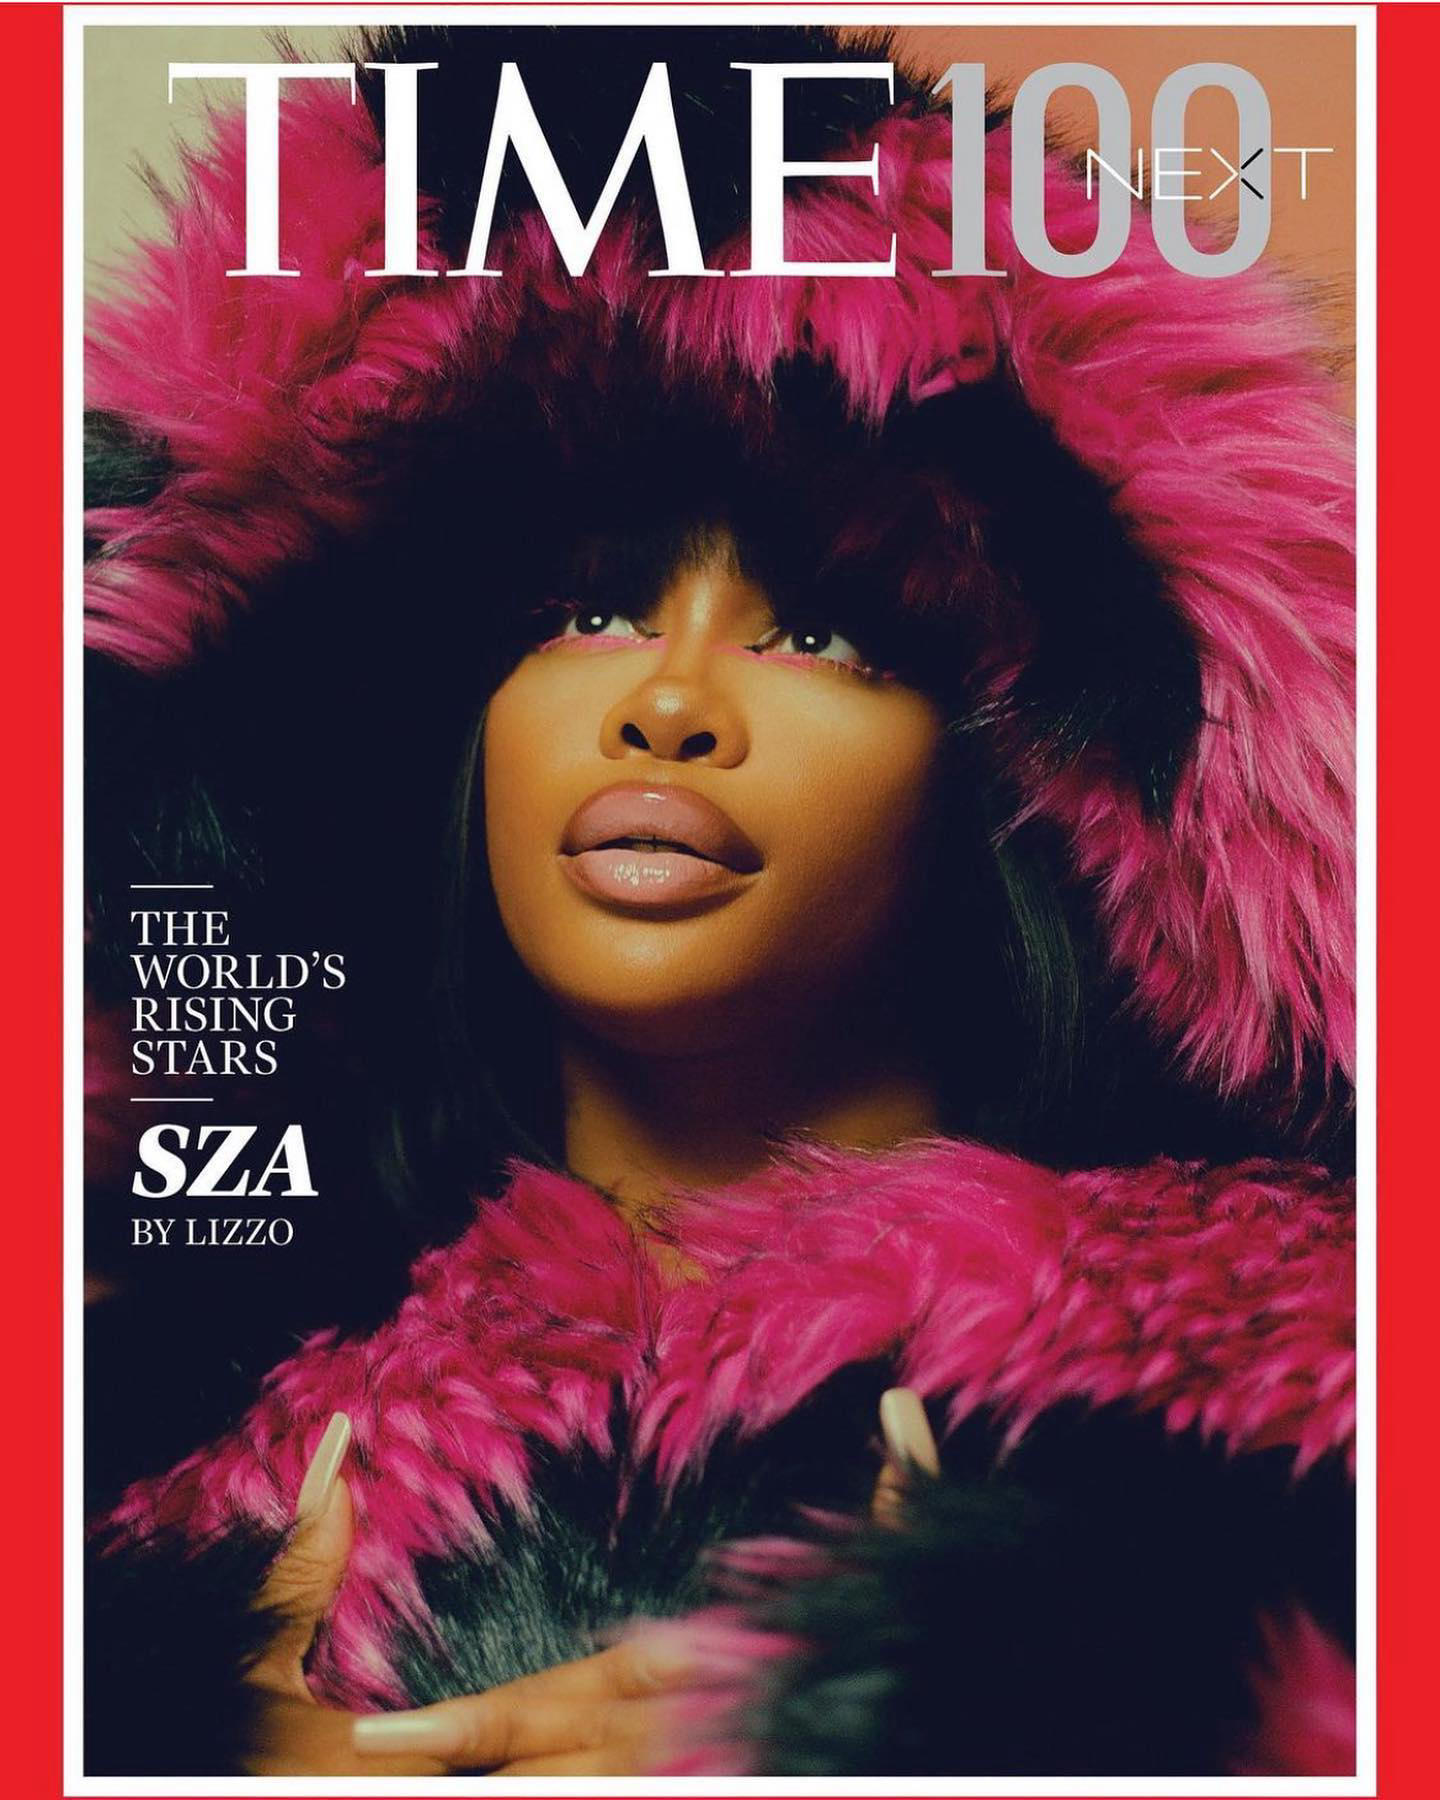 Sony Music - sza for #time